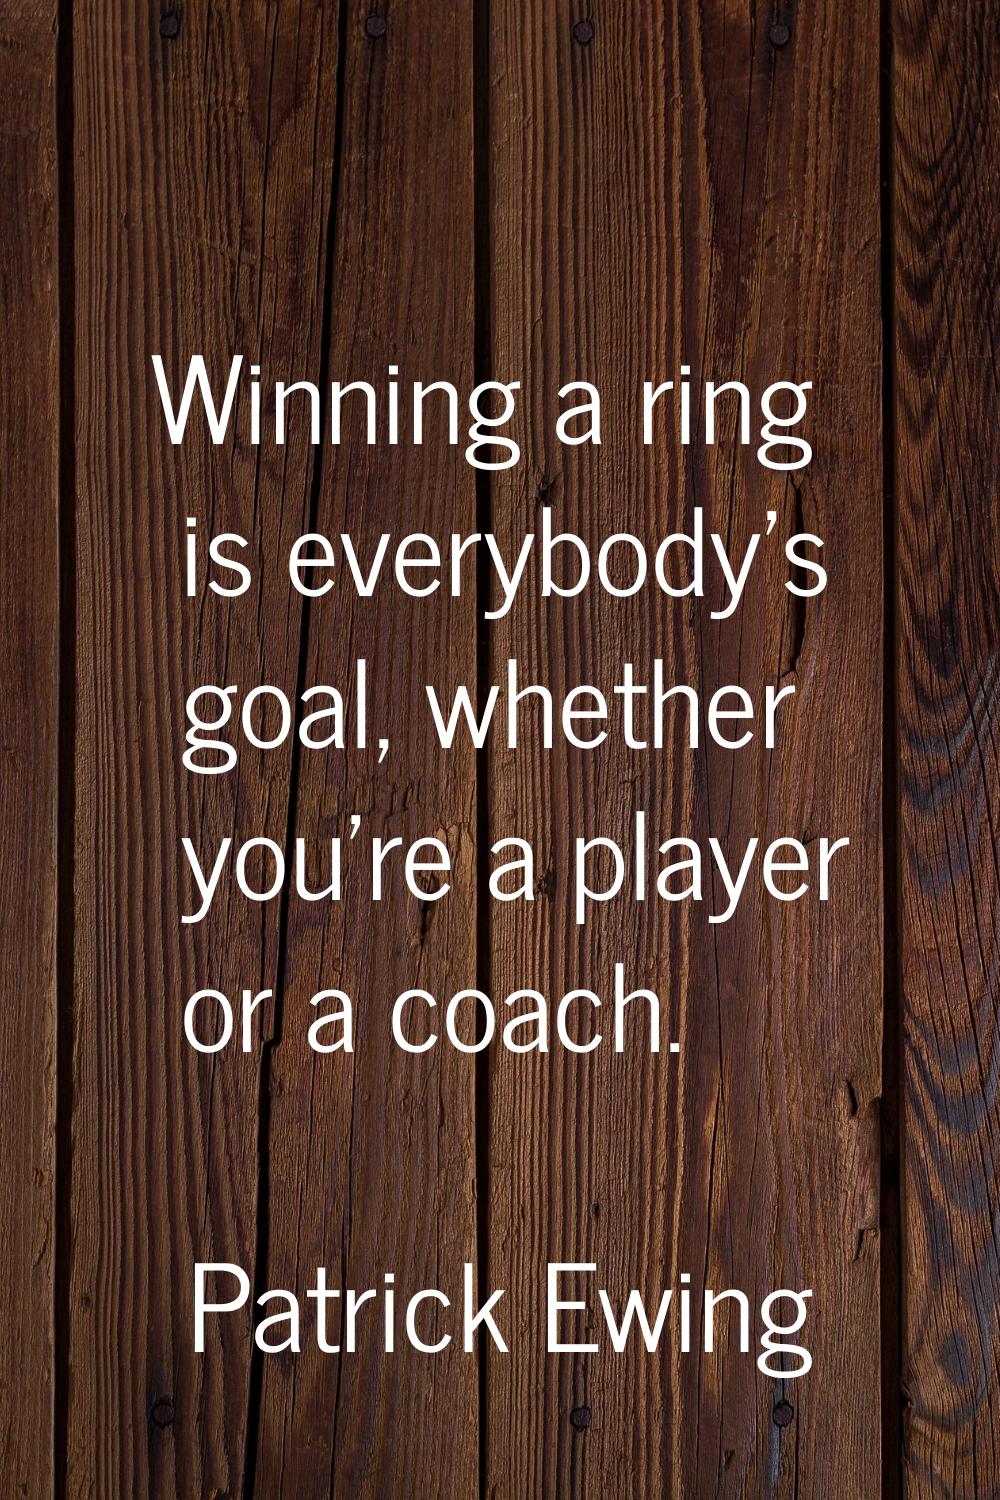 Winning a ring is everybody's goal, whether you're a player or a coach.